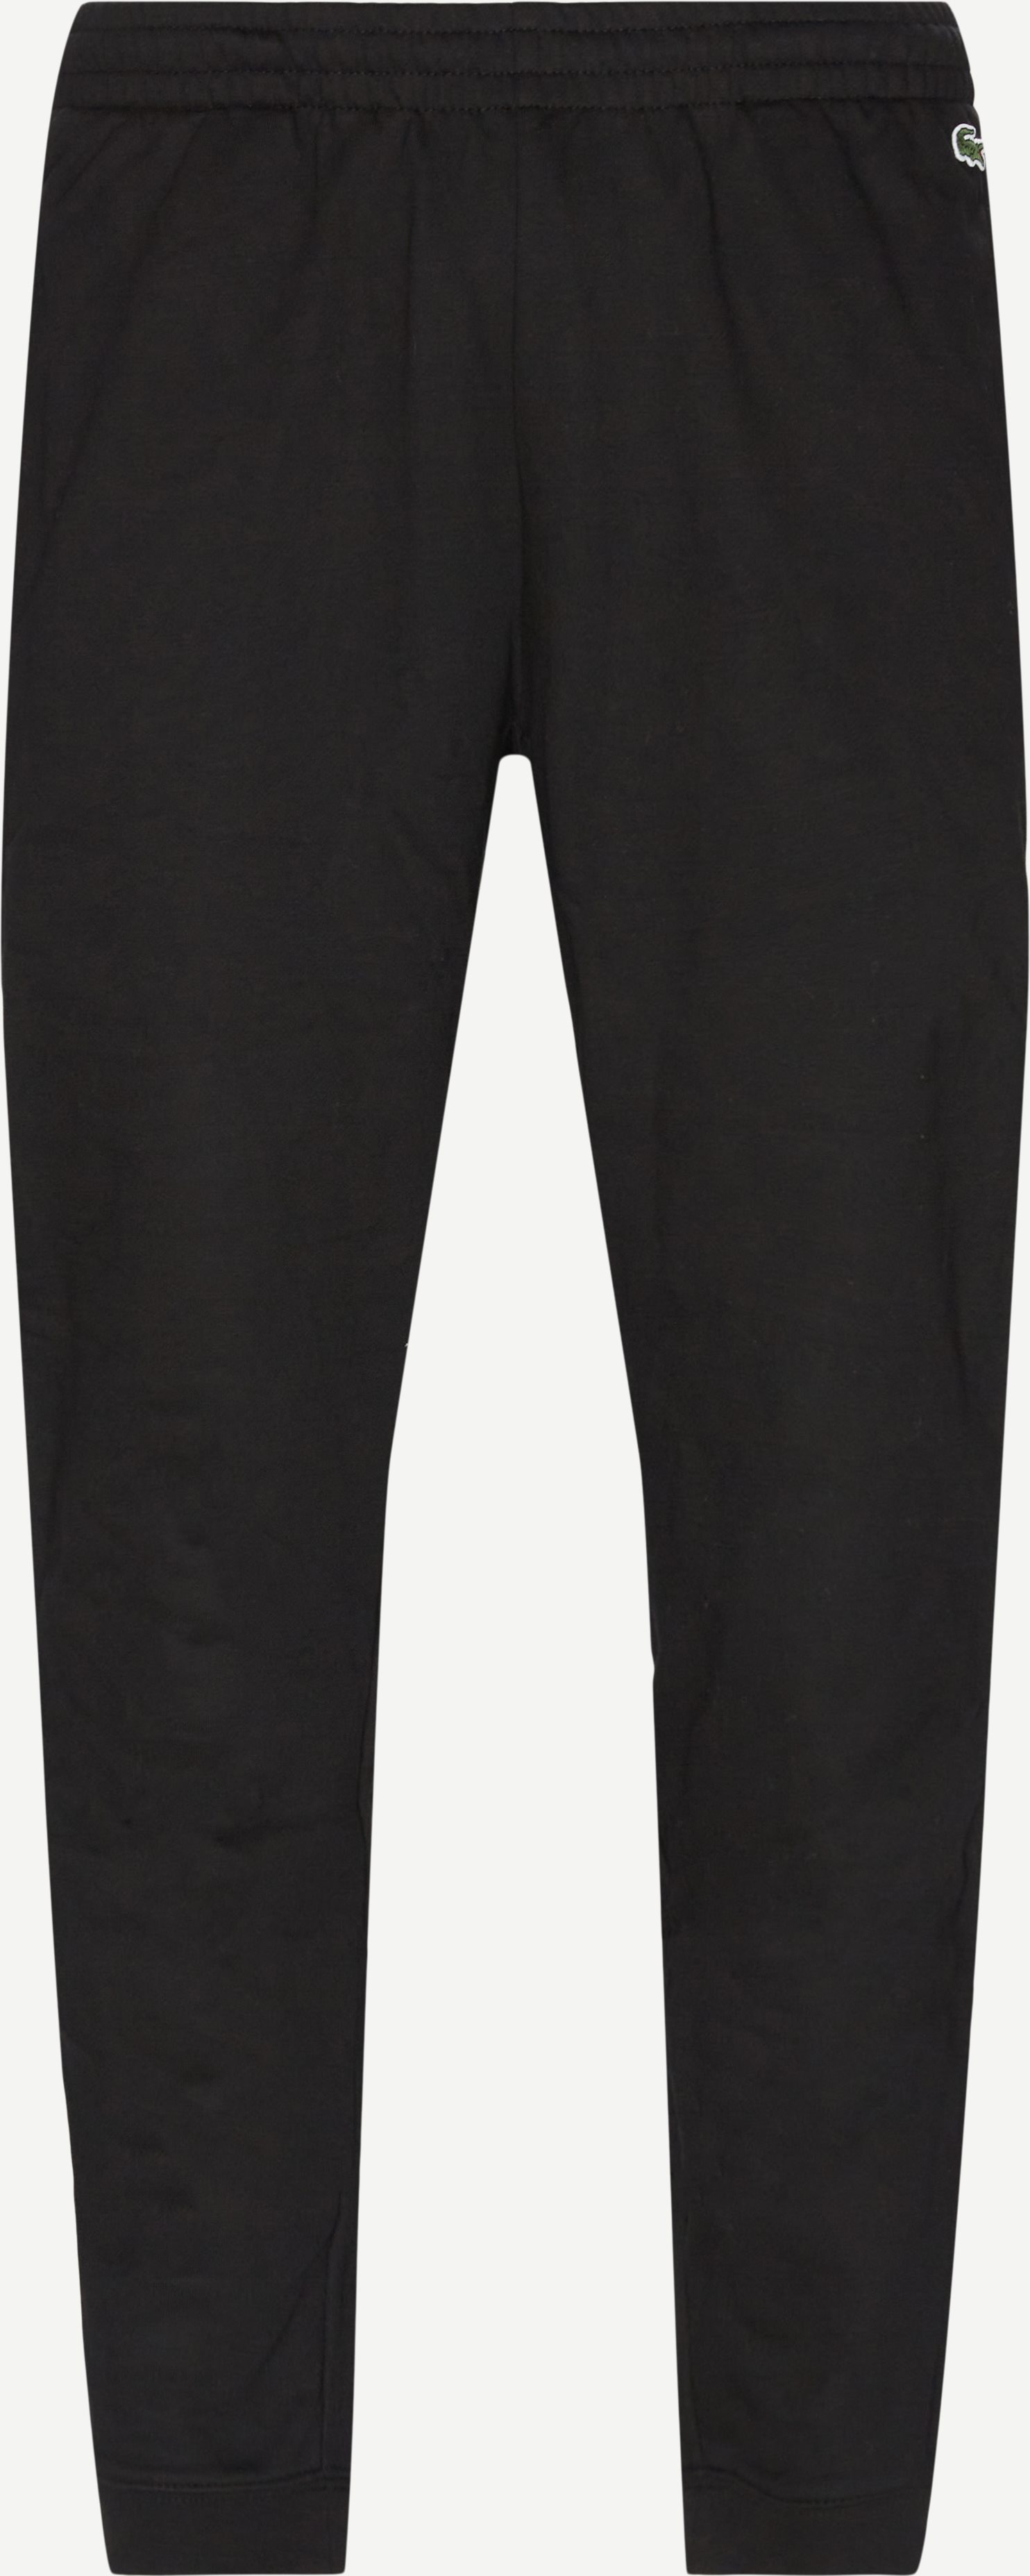 Signature Striped Colorblock Fleece Jogging Pants - Trousers - Tapered fit - Black